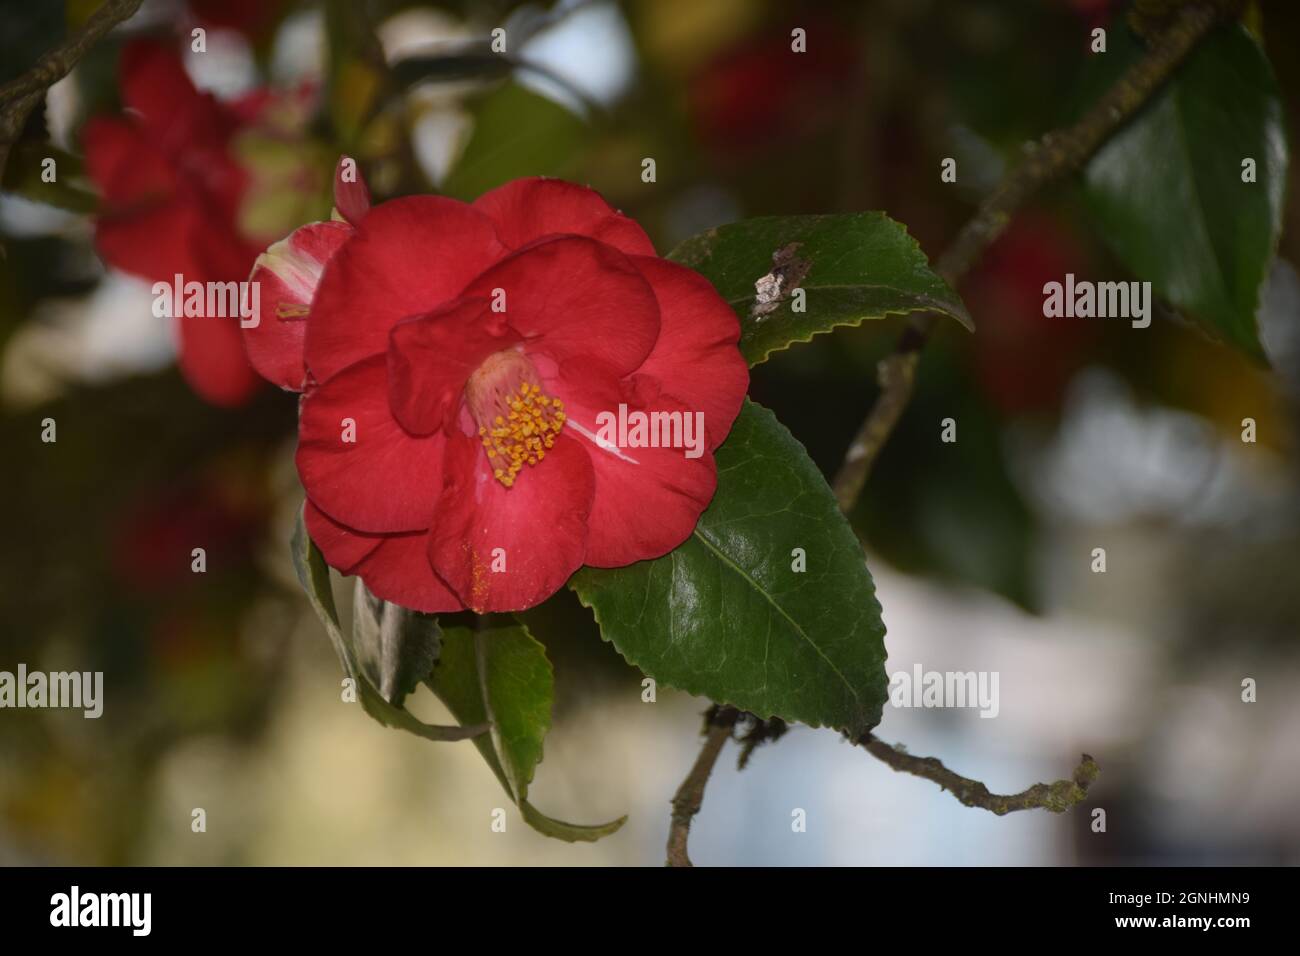 A red camellia growing in a garden in Oregon Stock Photo